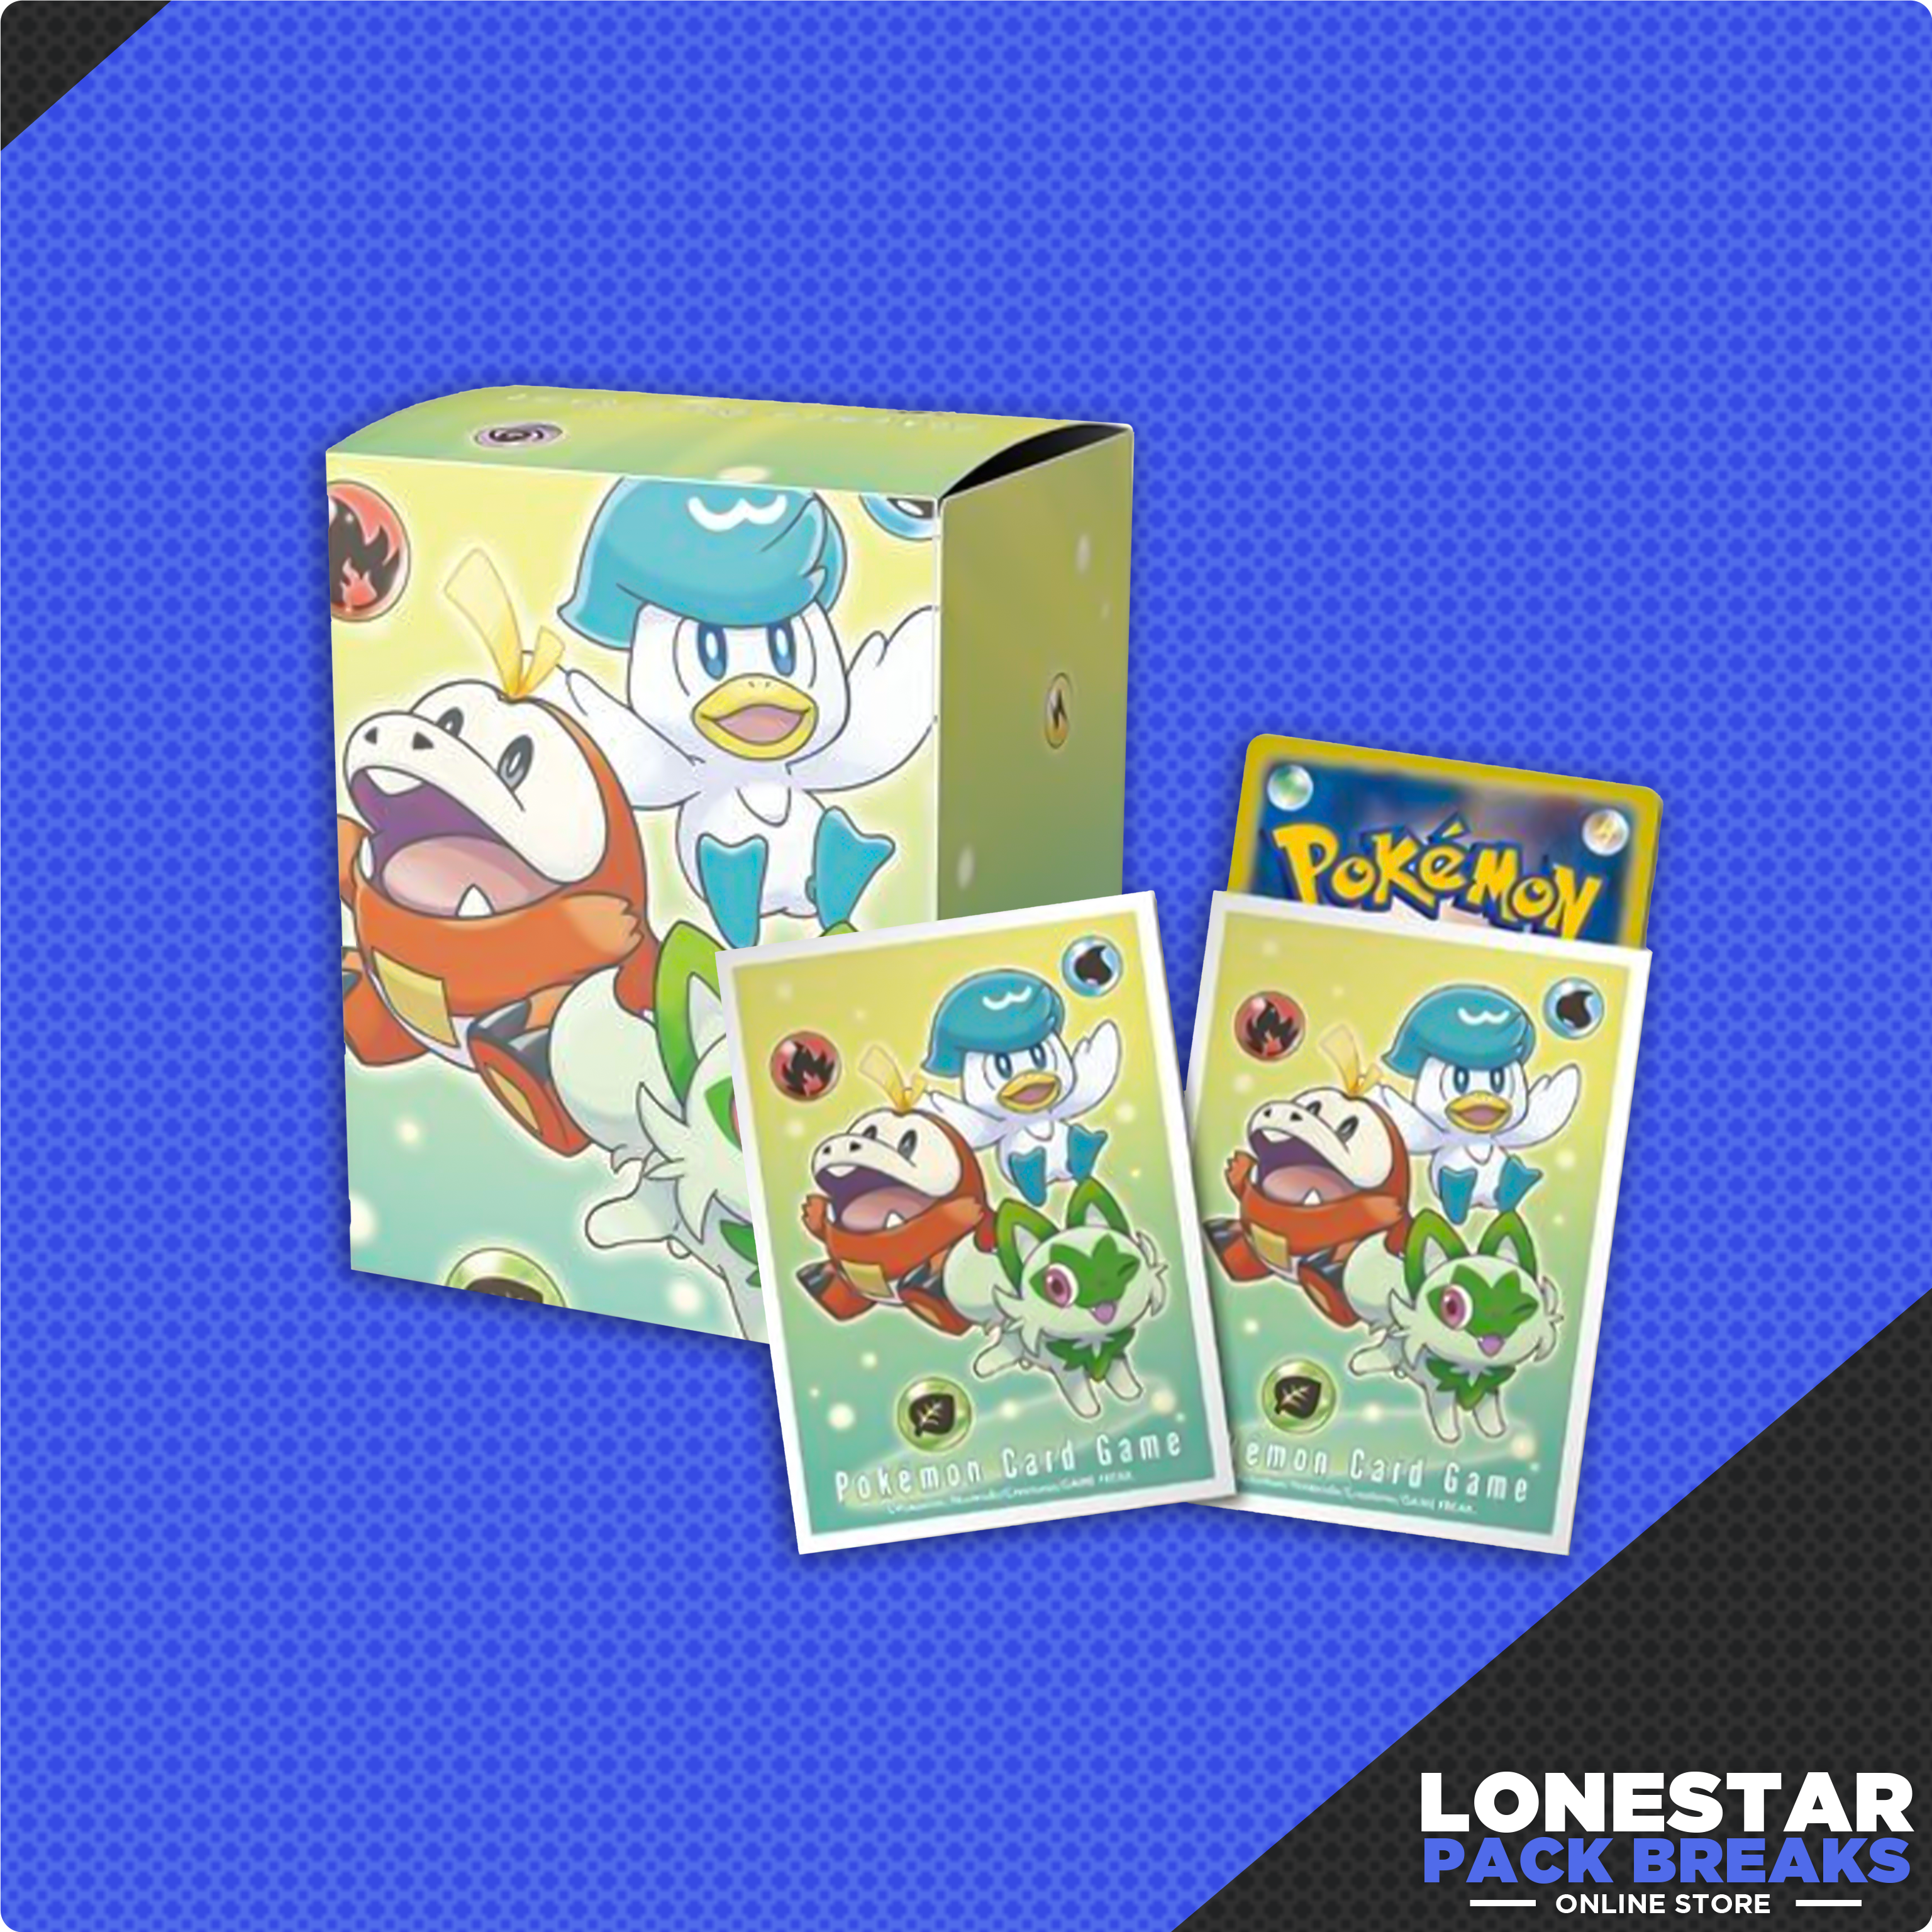 Paldean Starters Pokemon Center Japan Sleeves and Deck Box Combo